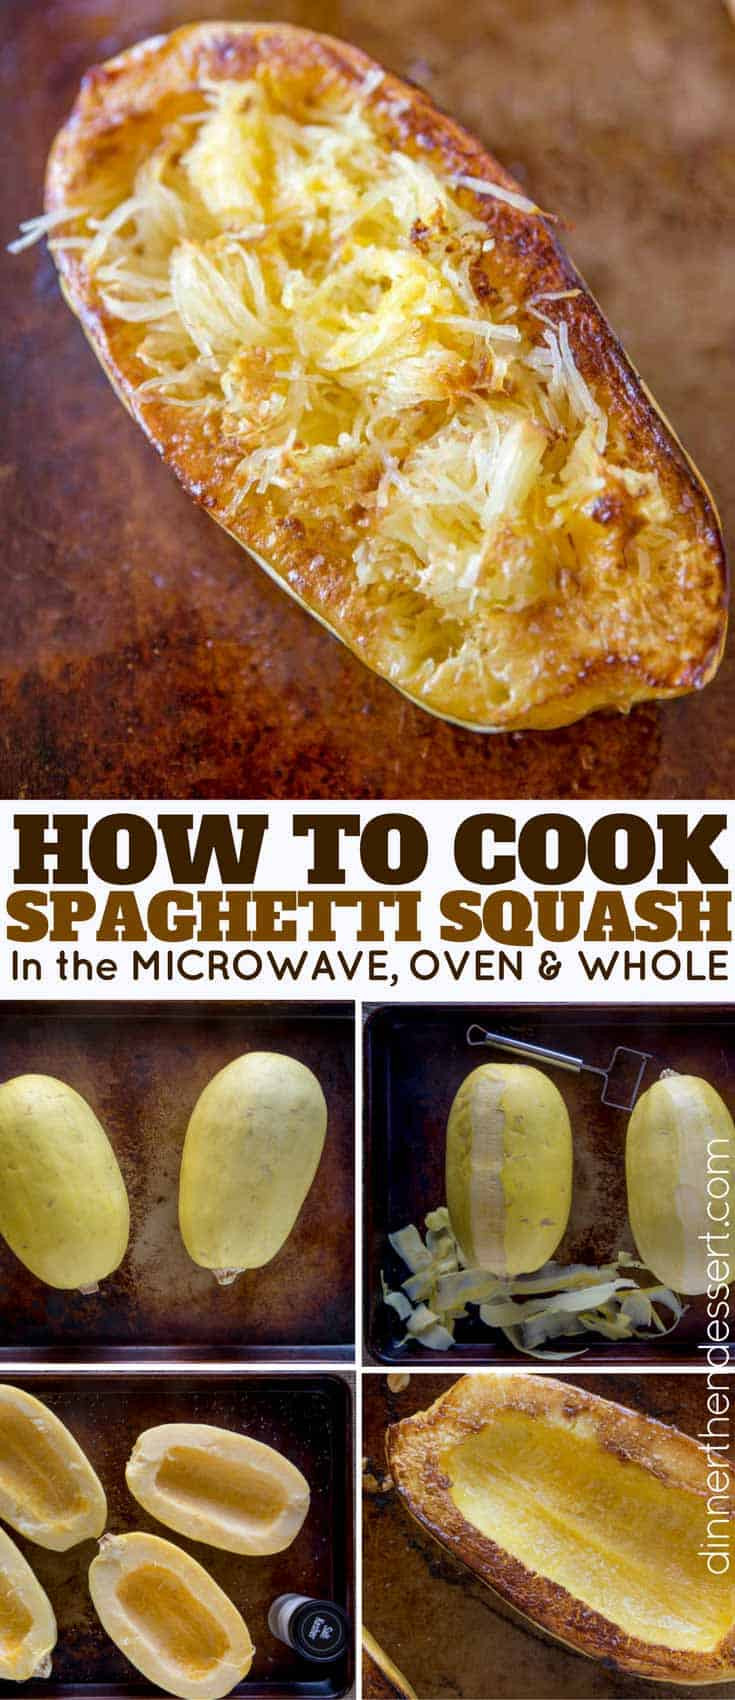 Spaghetti Squash Microwave Whole
 how long to cook spaghetti squash in oven